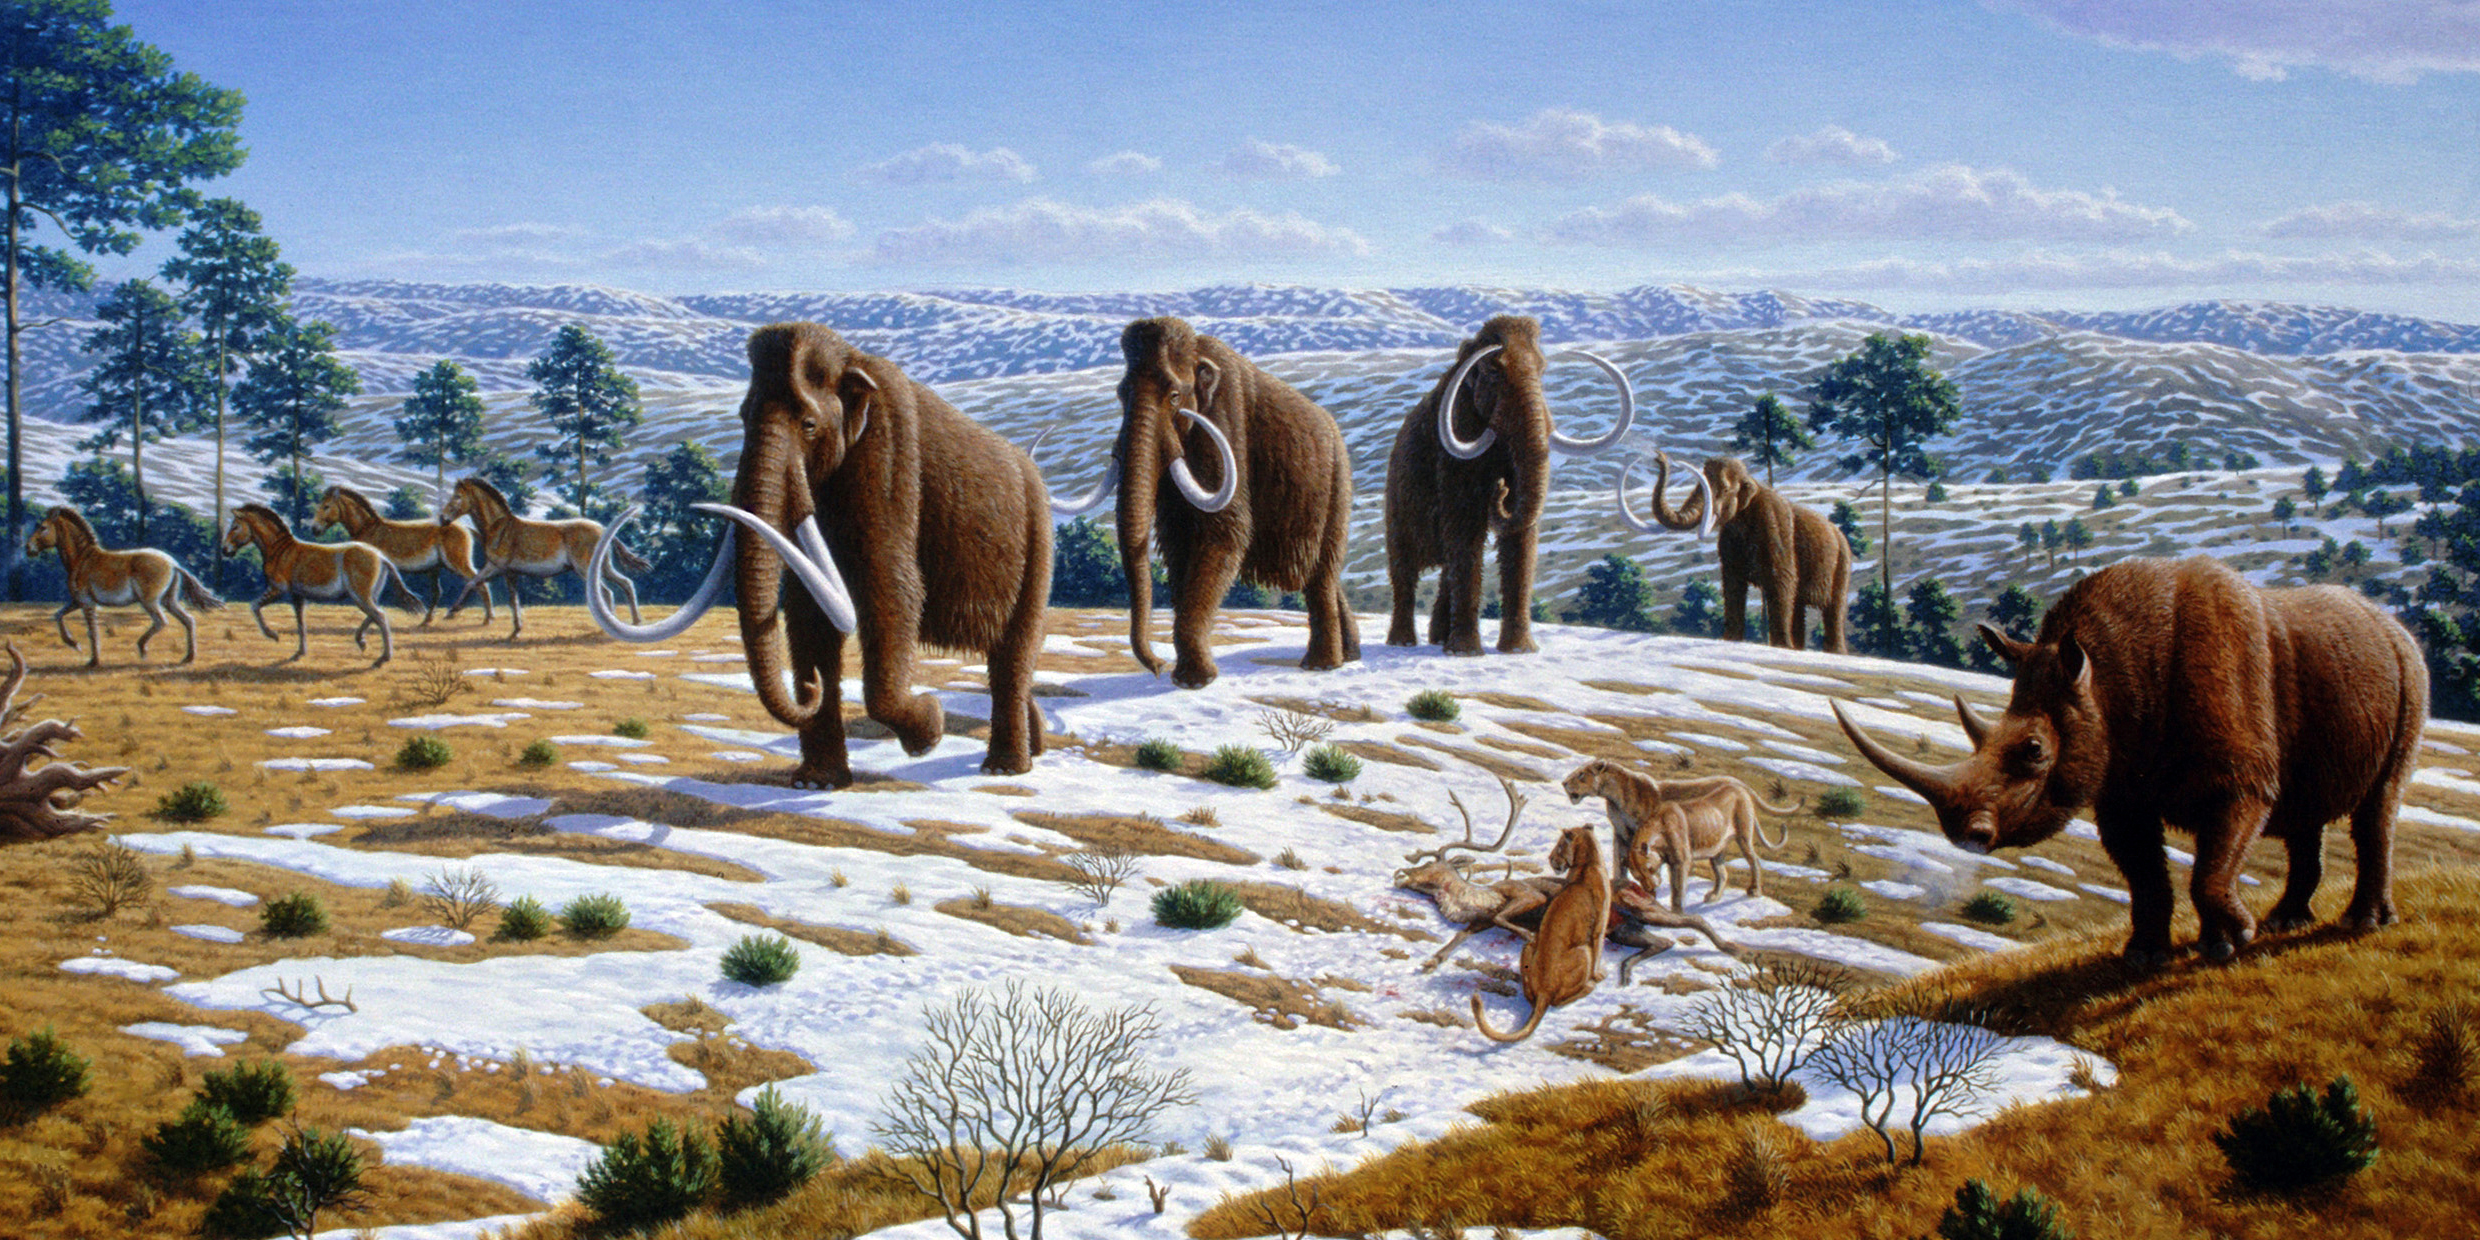 The mammoths’ demise